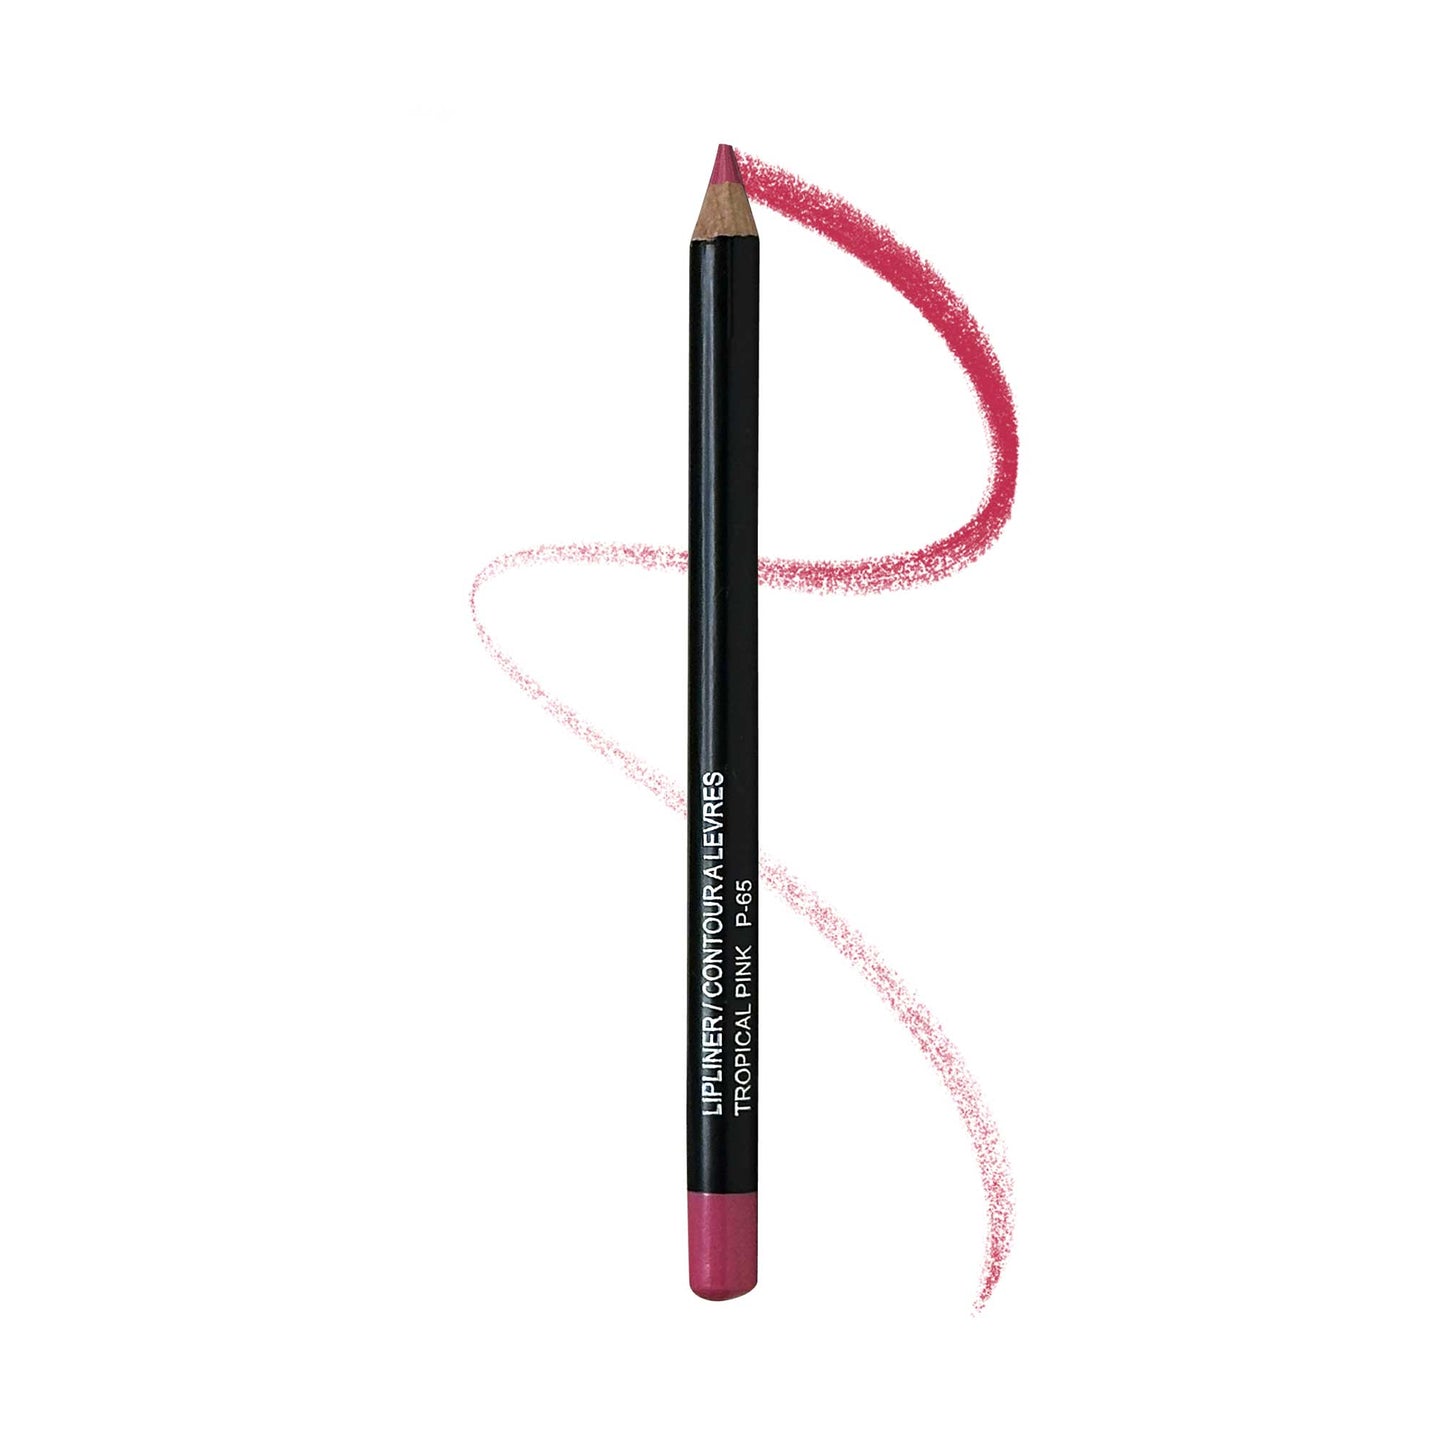 Create the perfect pout with our Cruisin Organics Tropical  Pink Lip Liner in Tropical Pink! This vibrant shade will add volume to your lips for a bold and beautiful look. Expertly crafted for long-lasting wear, this liner will enhance your natural lip shape and provide a pop of color. Make a statement with our tropical inspired pink shade.